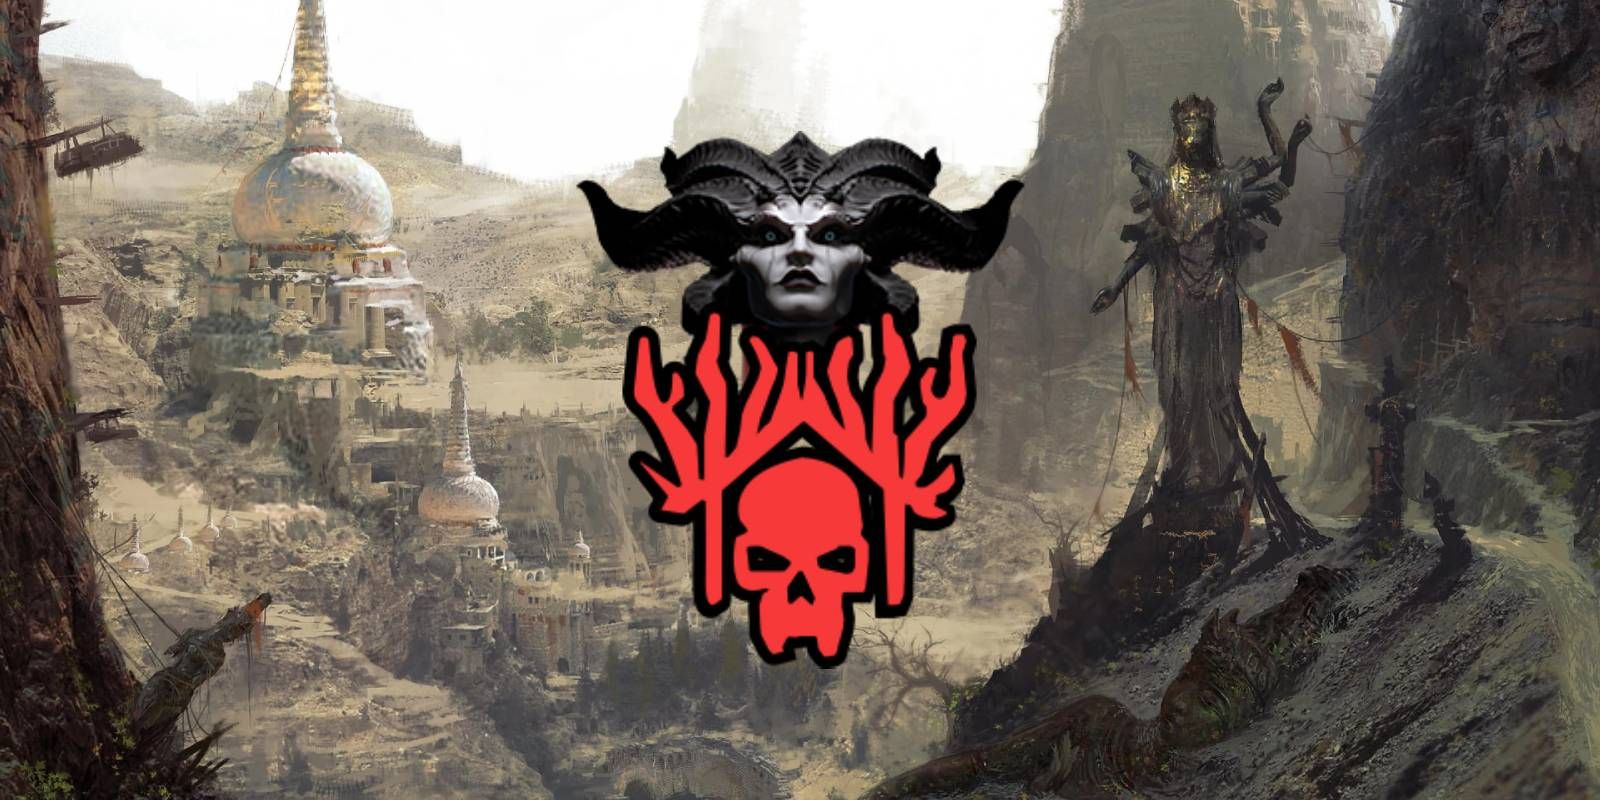 Diablo 4 Dry Steppes Location in Background with Stronghold and Lilith Symbols in Center